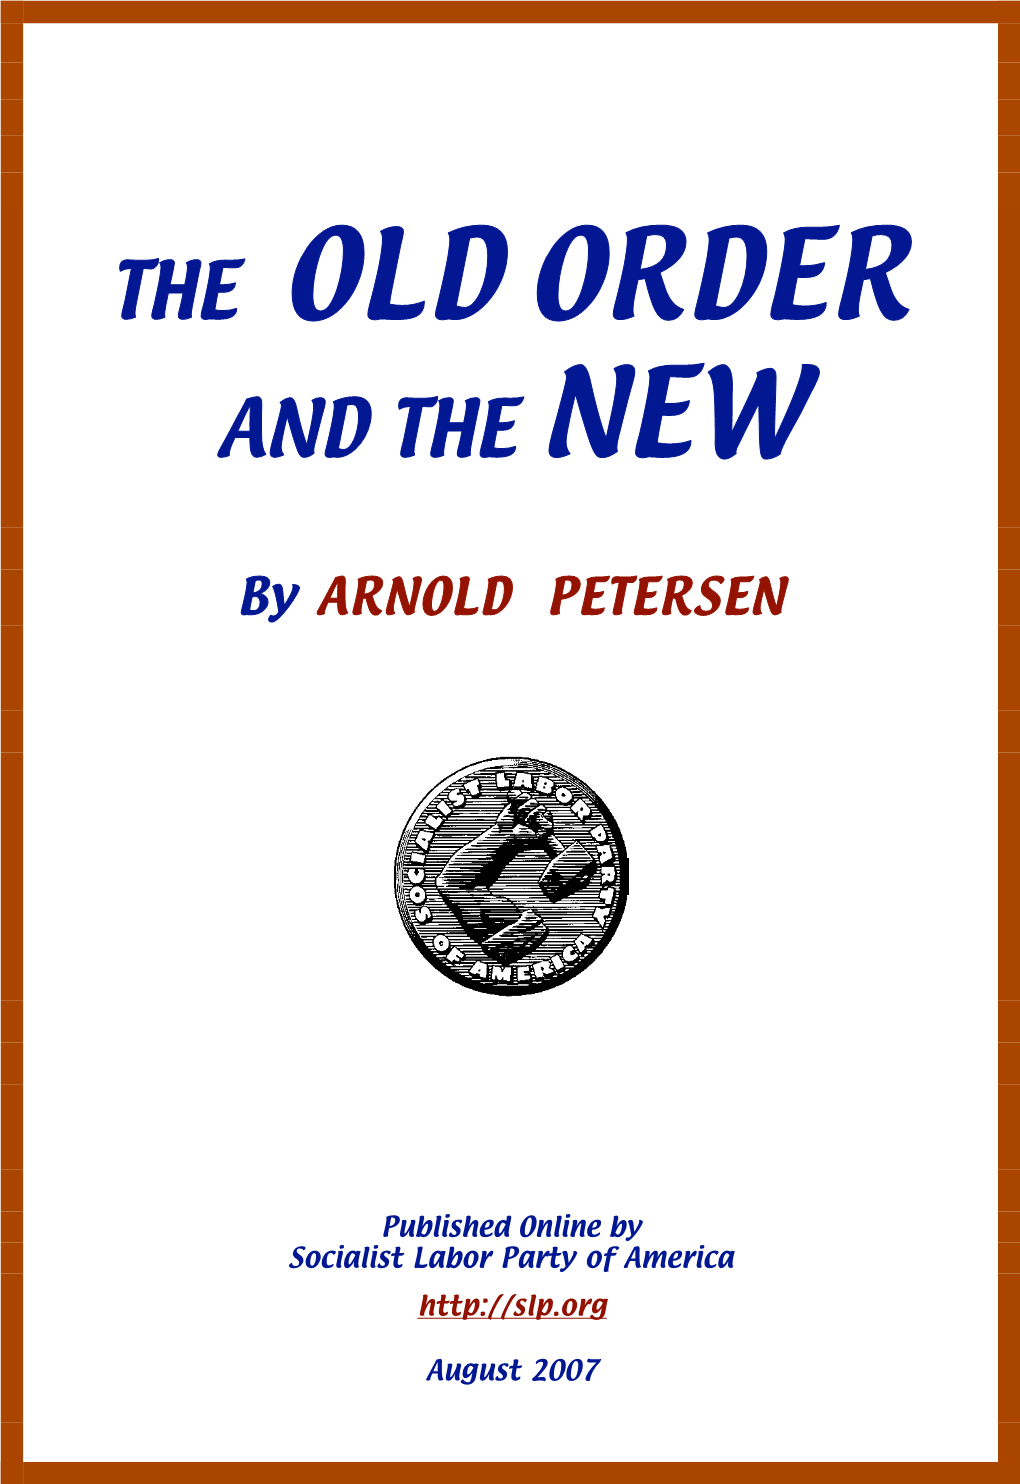 The Old Order and the New